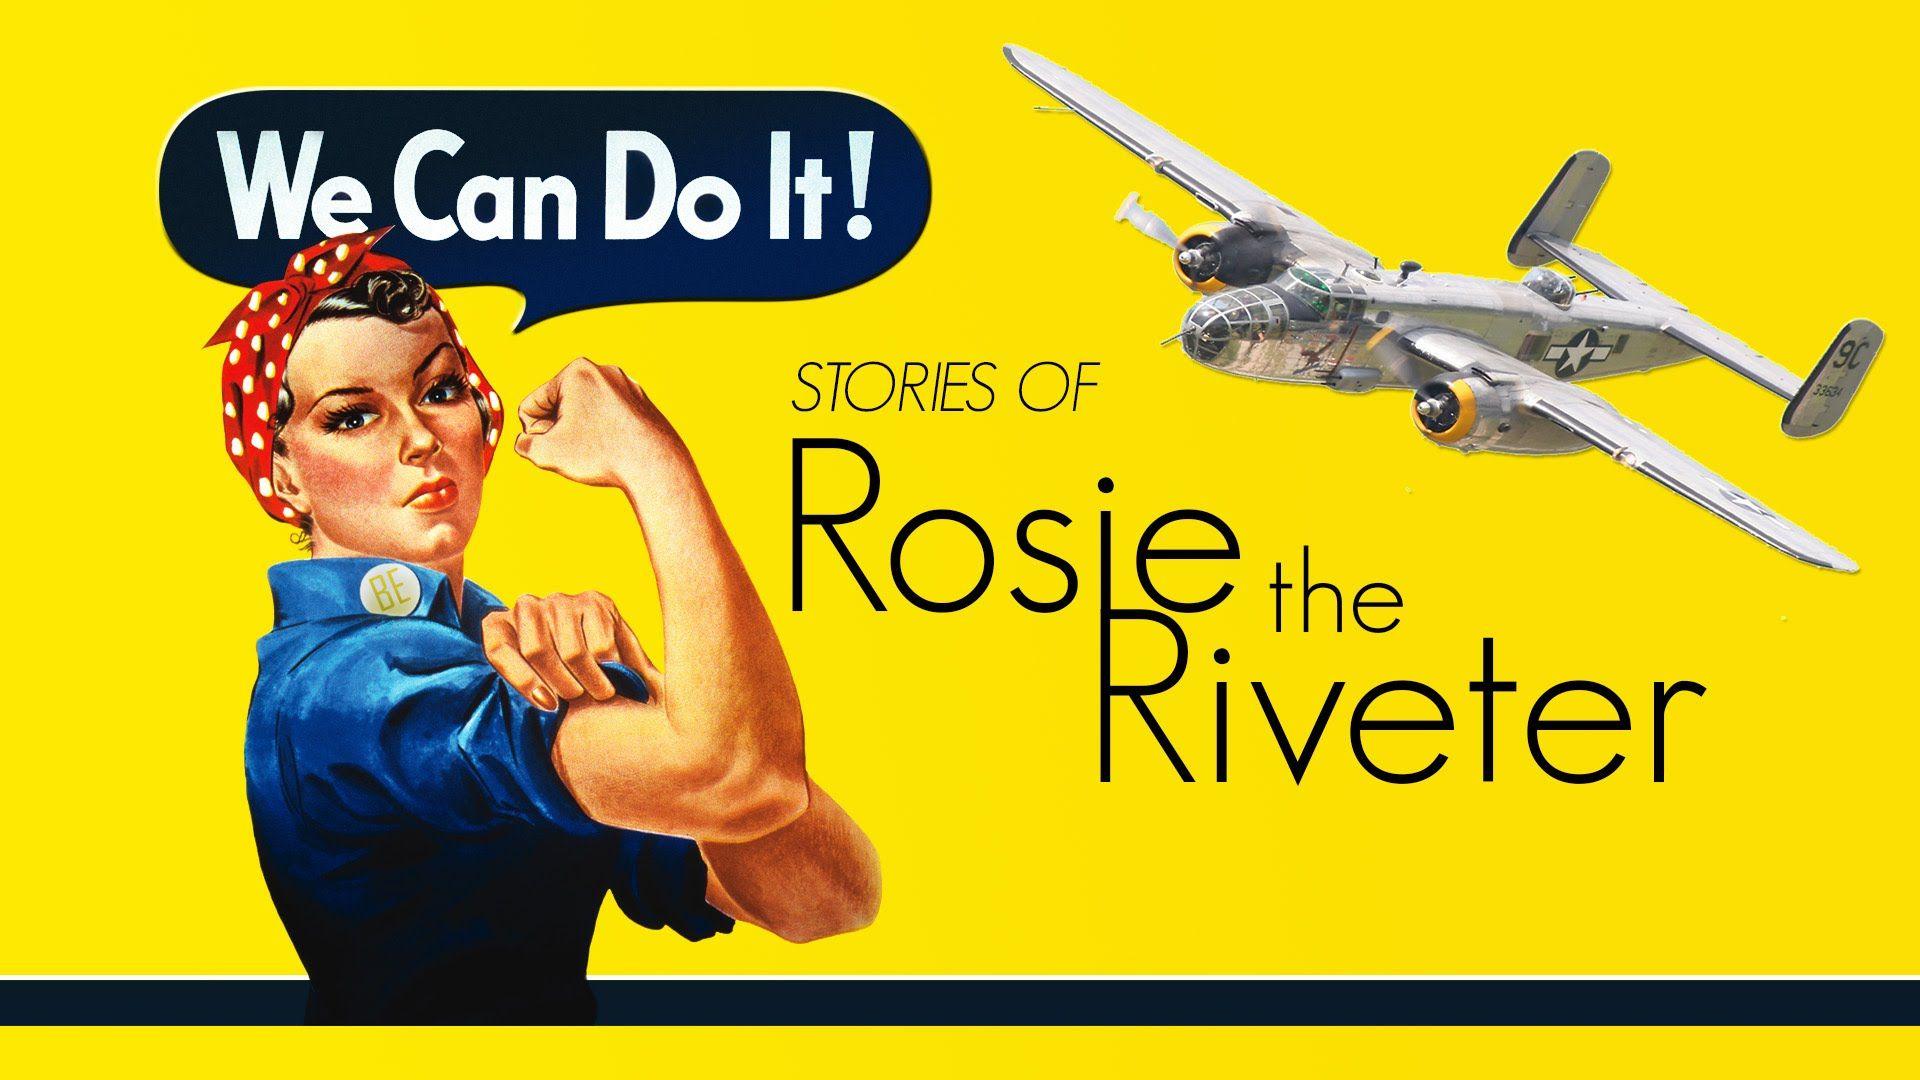 We can star. Плакат «we can do it! ». Пин ап we can do it. Rosie the Riveter. We can do it СССР.